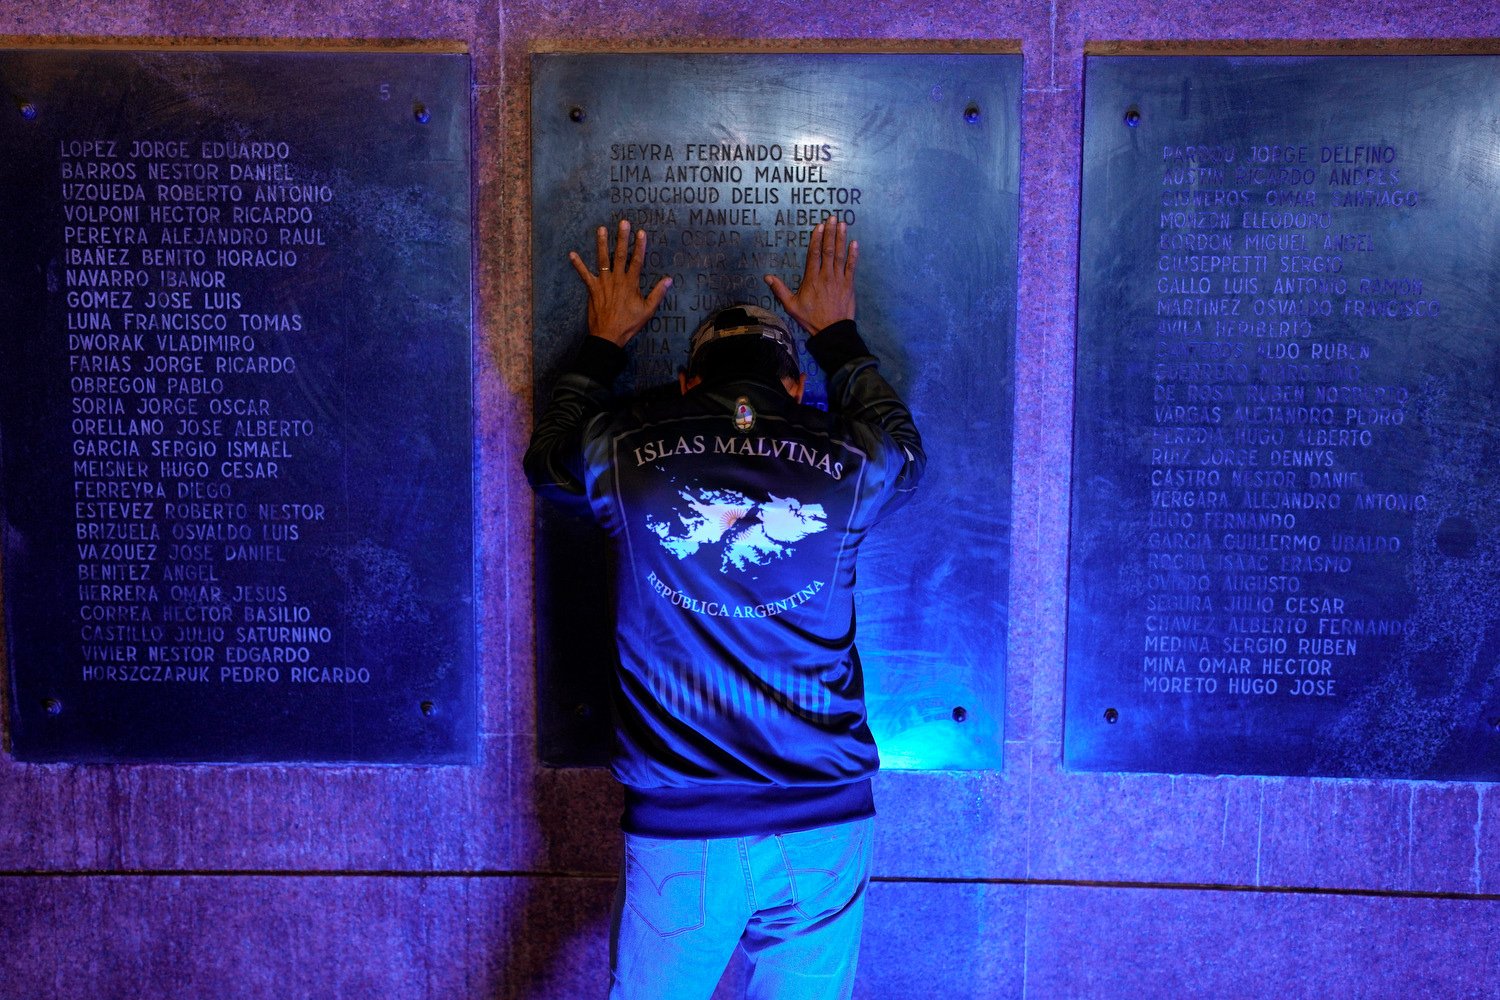  A man places his hands on a war memorial during a ceremony marking the 42nd anniversary of the conflict between Argentina and Great Britain over the Falkland Islands or Malvinas Islands in Buenos Aires, Argentina, April 1, 2024. (AP Photo/Natacha Pi